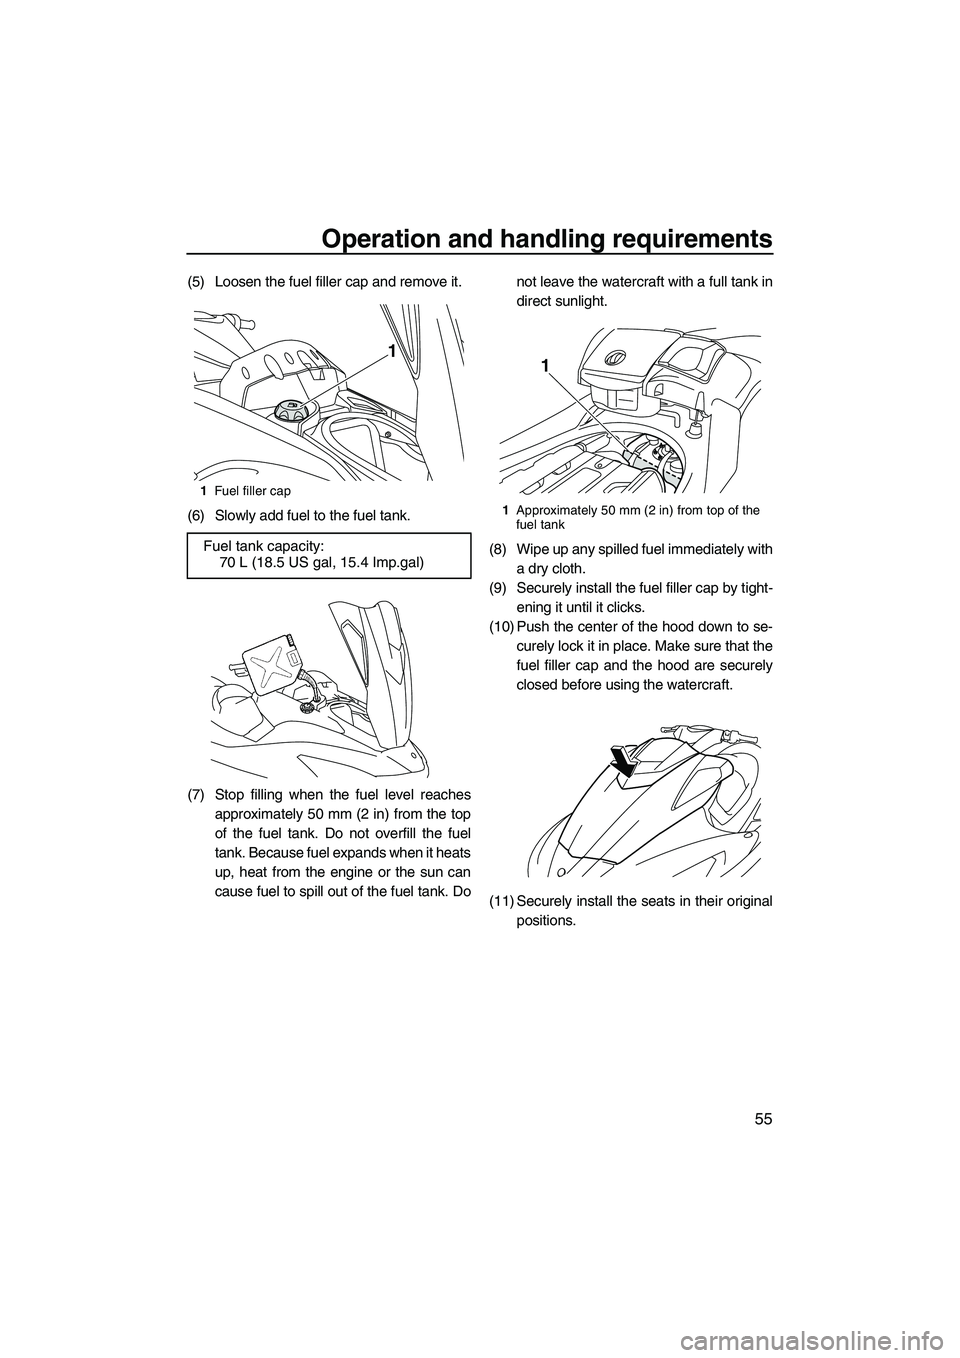 YAMAHA SVHO 2011  Owners Manual Operation and handling requirements
55
(5) Loosen the fuel filler cap and remove it.
(6) Slowly add fuel to the fuel tank.
(7) Stop filling when the fuel level reaches
approximately 50 mm (2 in) from 